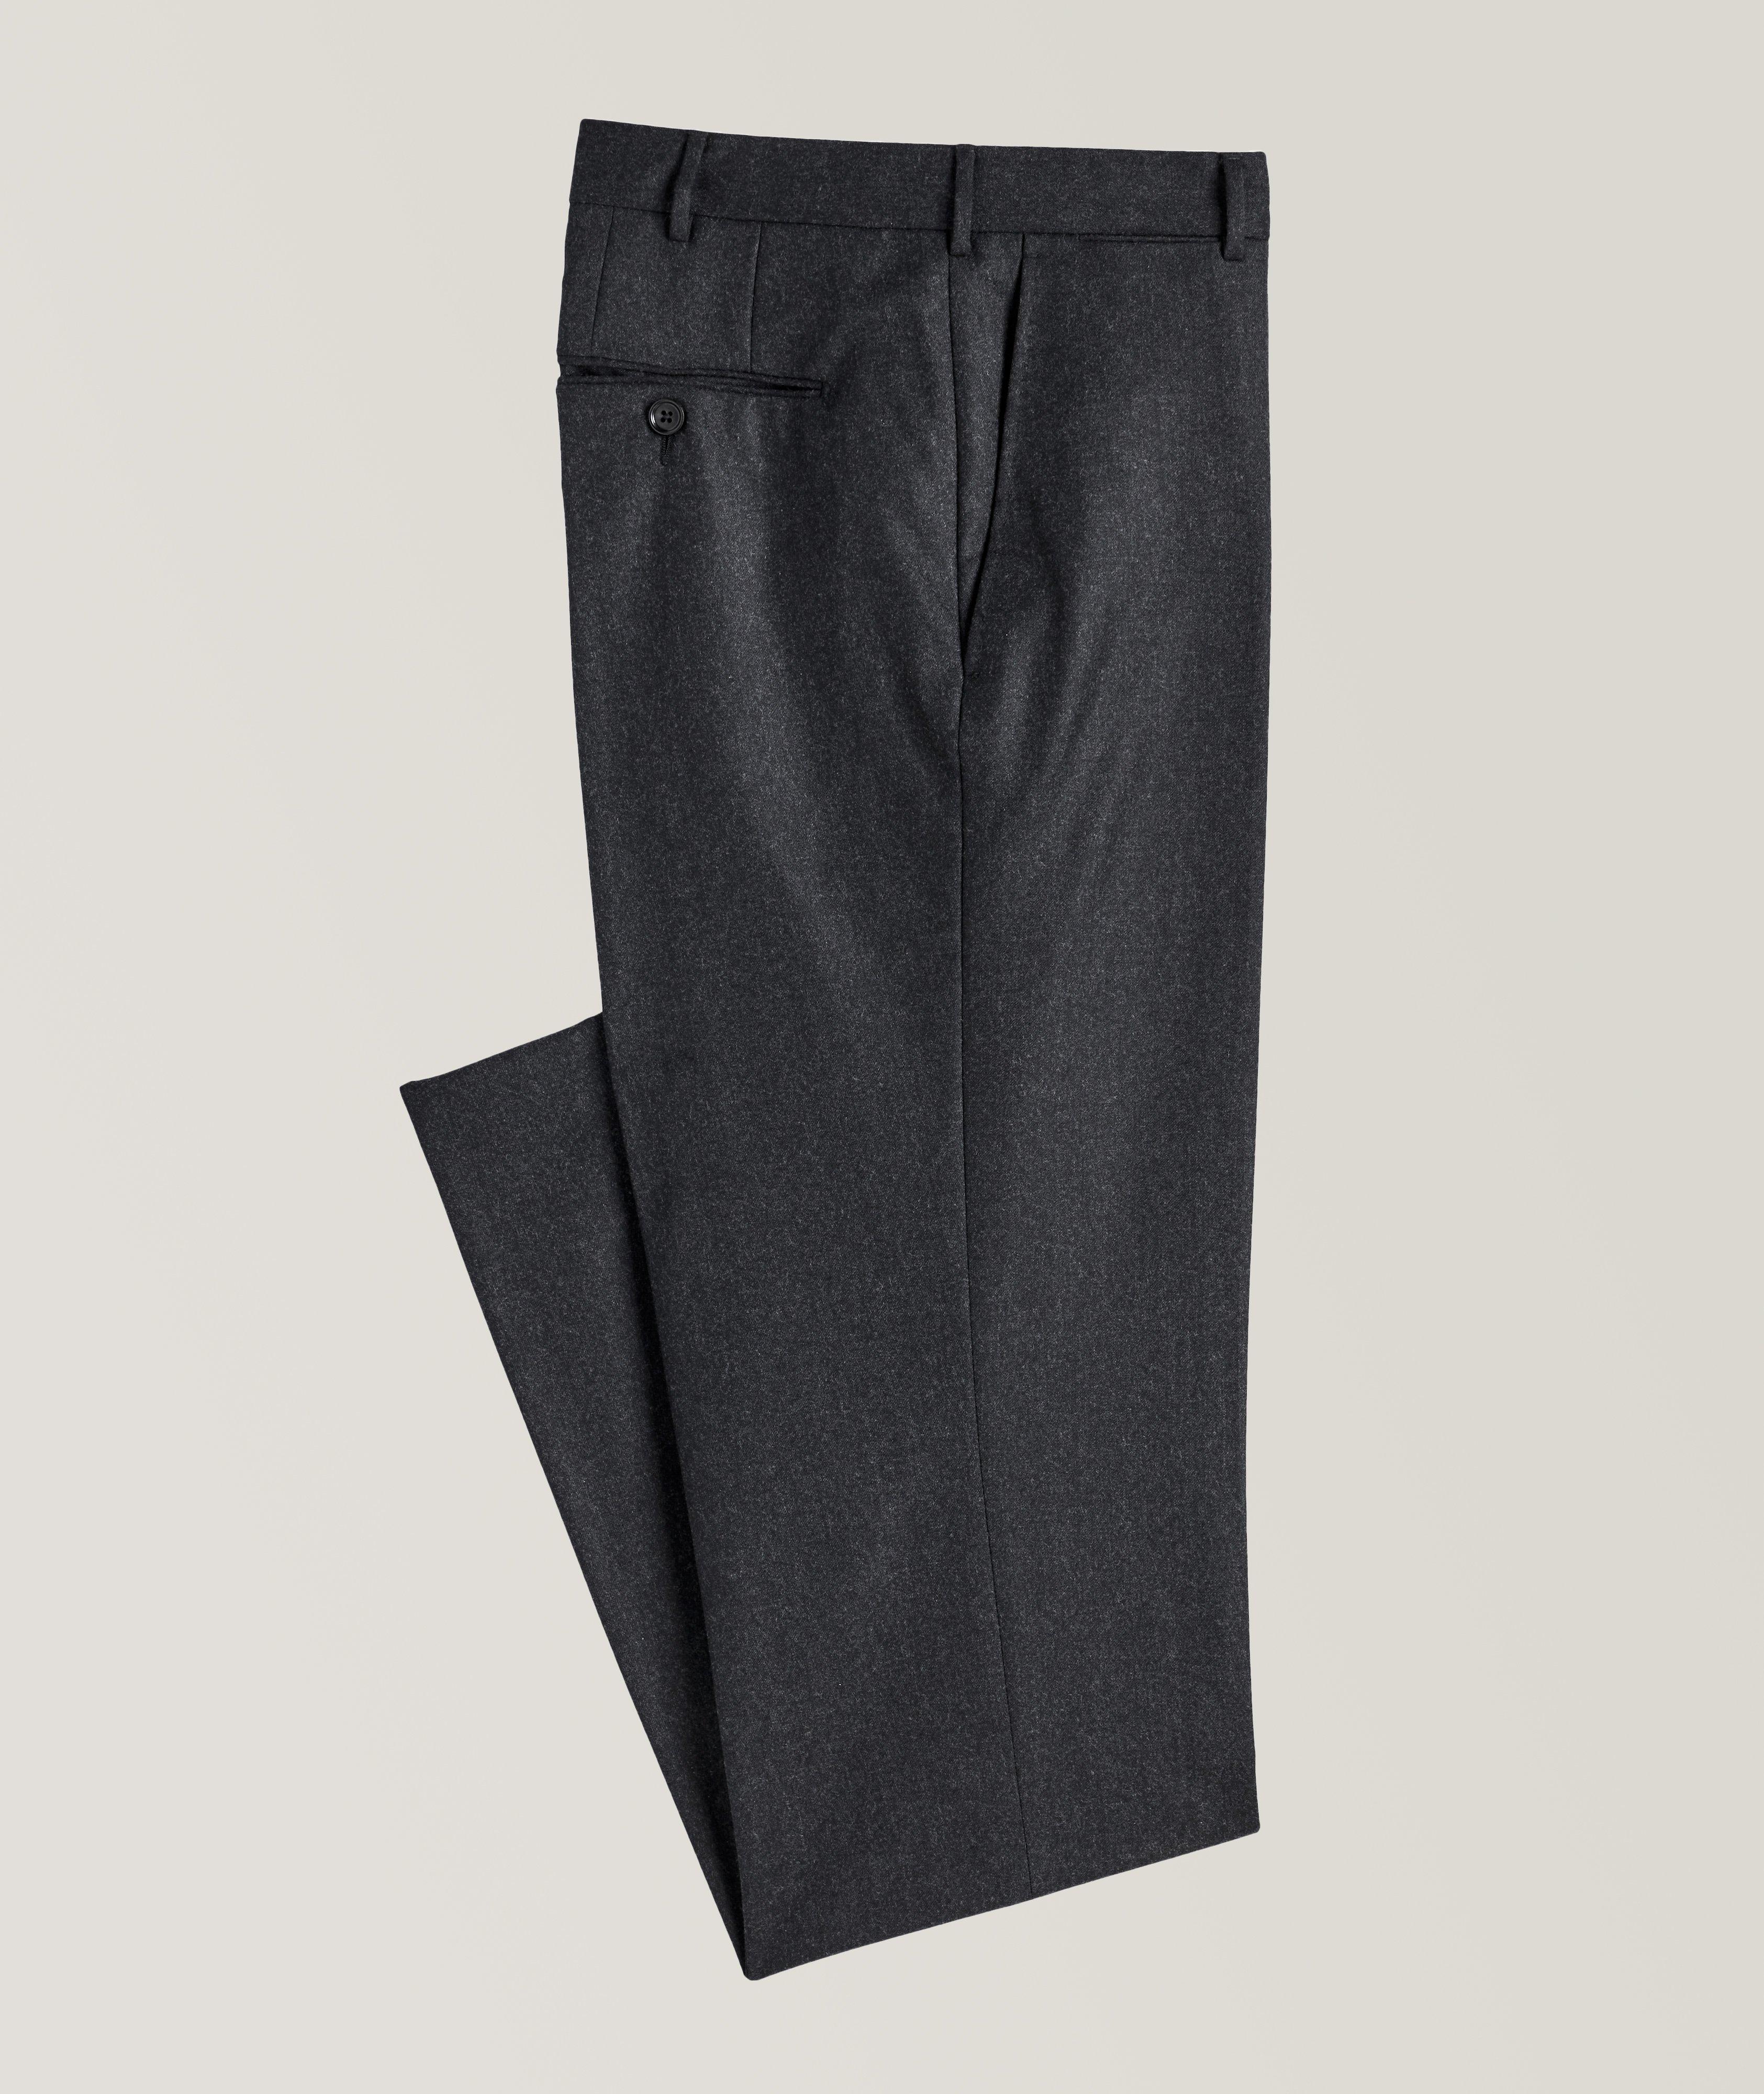 Sartorial Stretch-Wool Flannel Dress Pants image 0